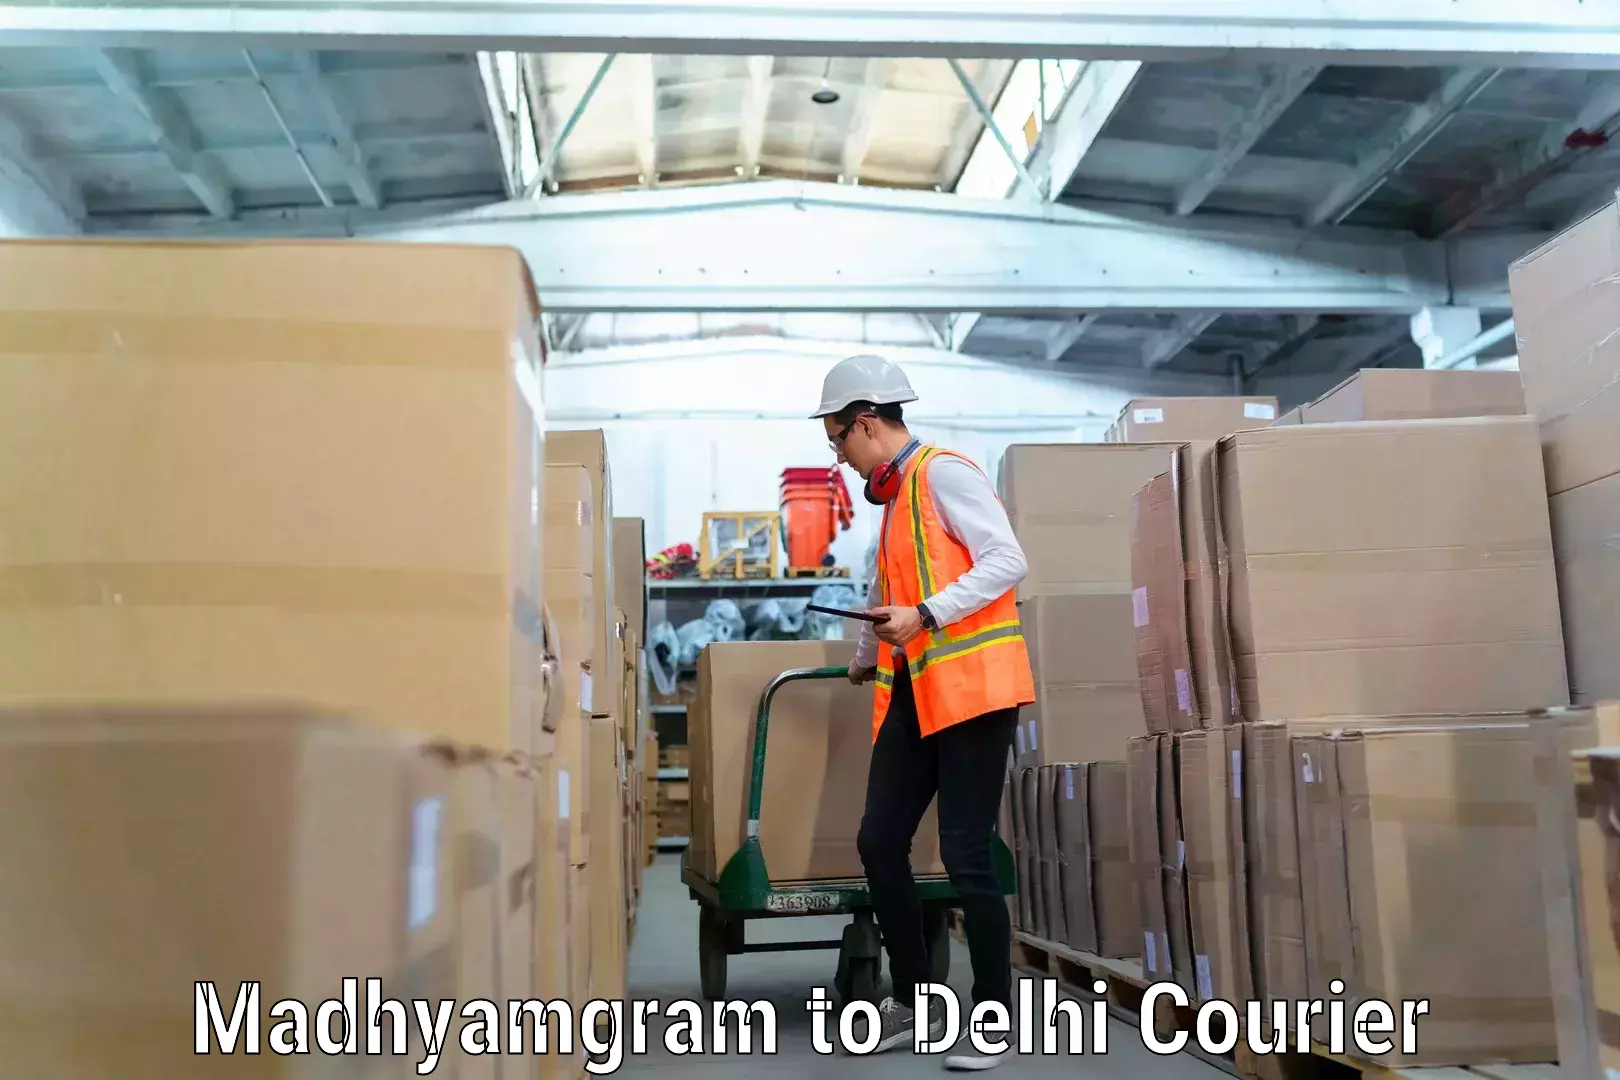 Furniture relocation experts Madhyamgram to Delhi